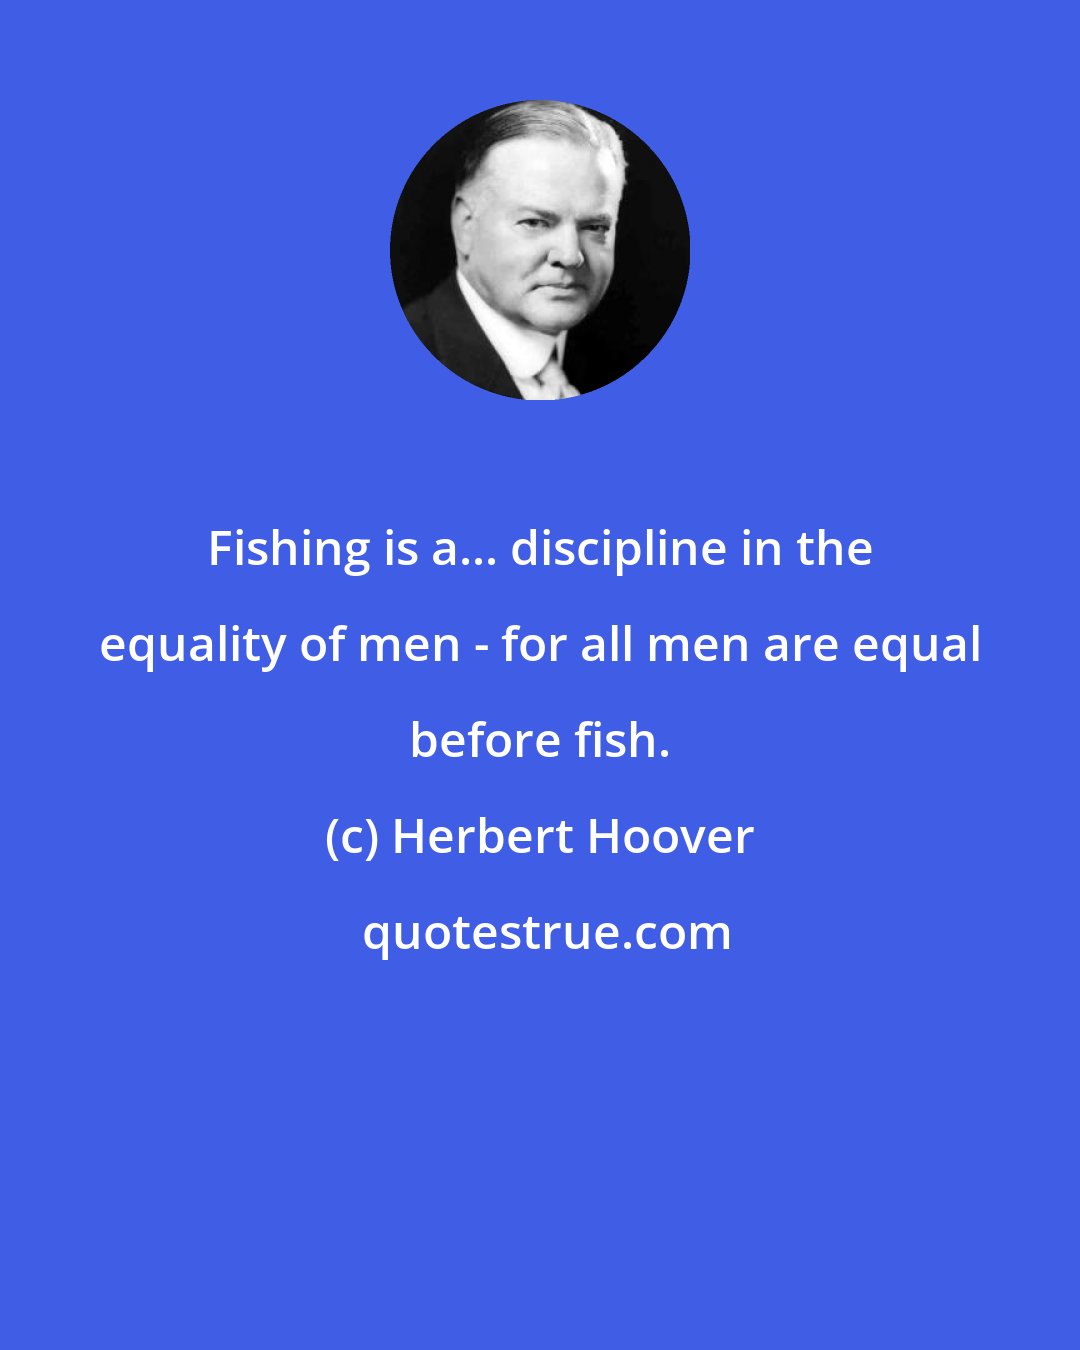 Herbert Hoover: Fishing is a... discipline in the equality of men - for all men are equal before fish.